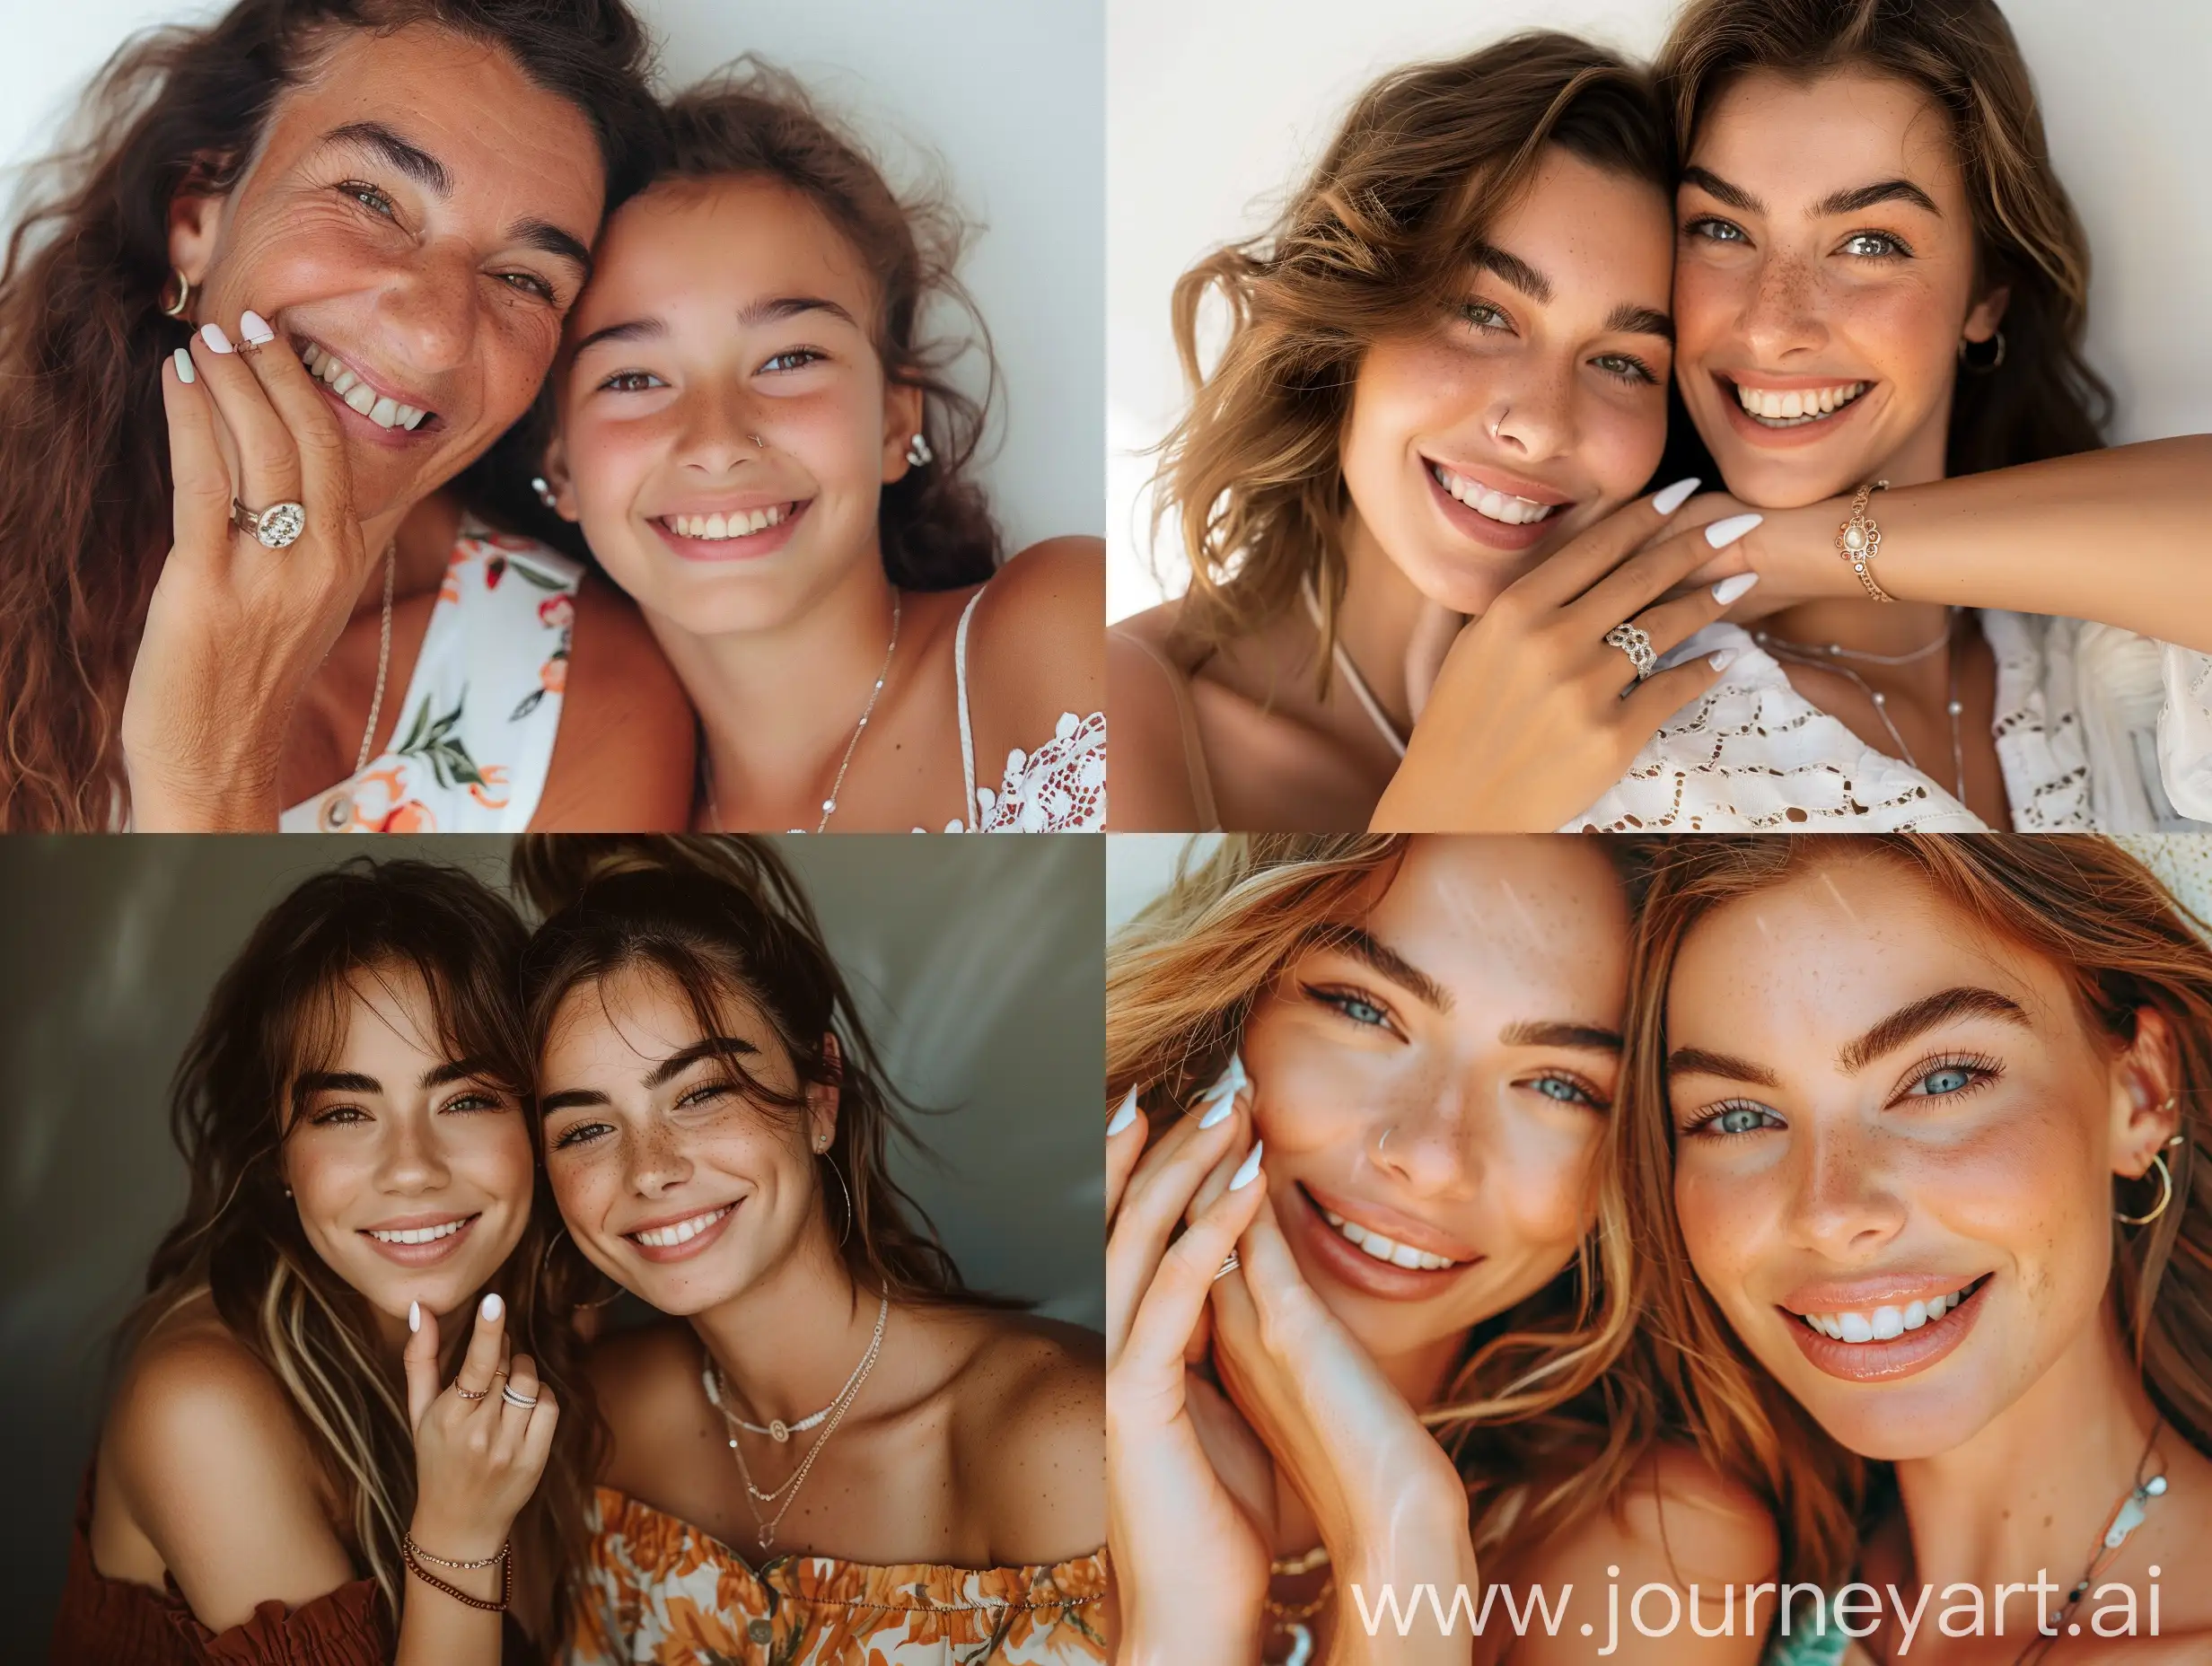 Aesthetic Facebook photograph of a mother and 18 year old daughter taking a photo together, professional studio, studio lighting, close up of face, highly detailed, smiling, hands up on faces, white gel nail polish, top models, super model faces, bushy eyebrows, summer clothing, necklaces, rings